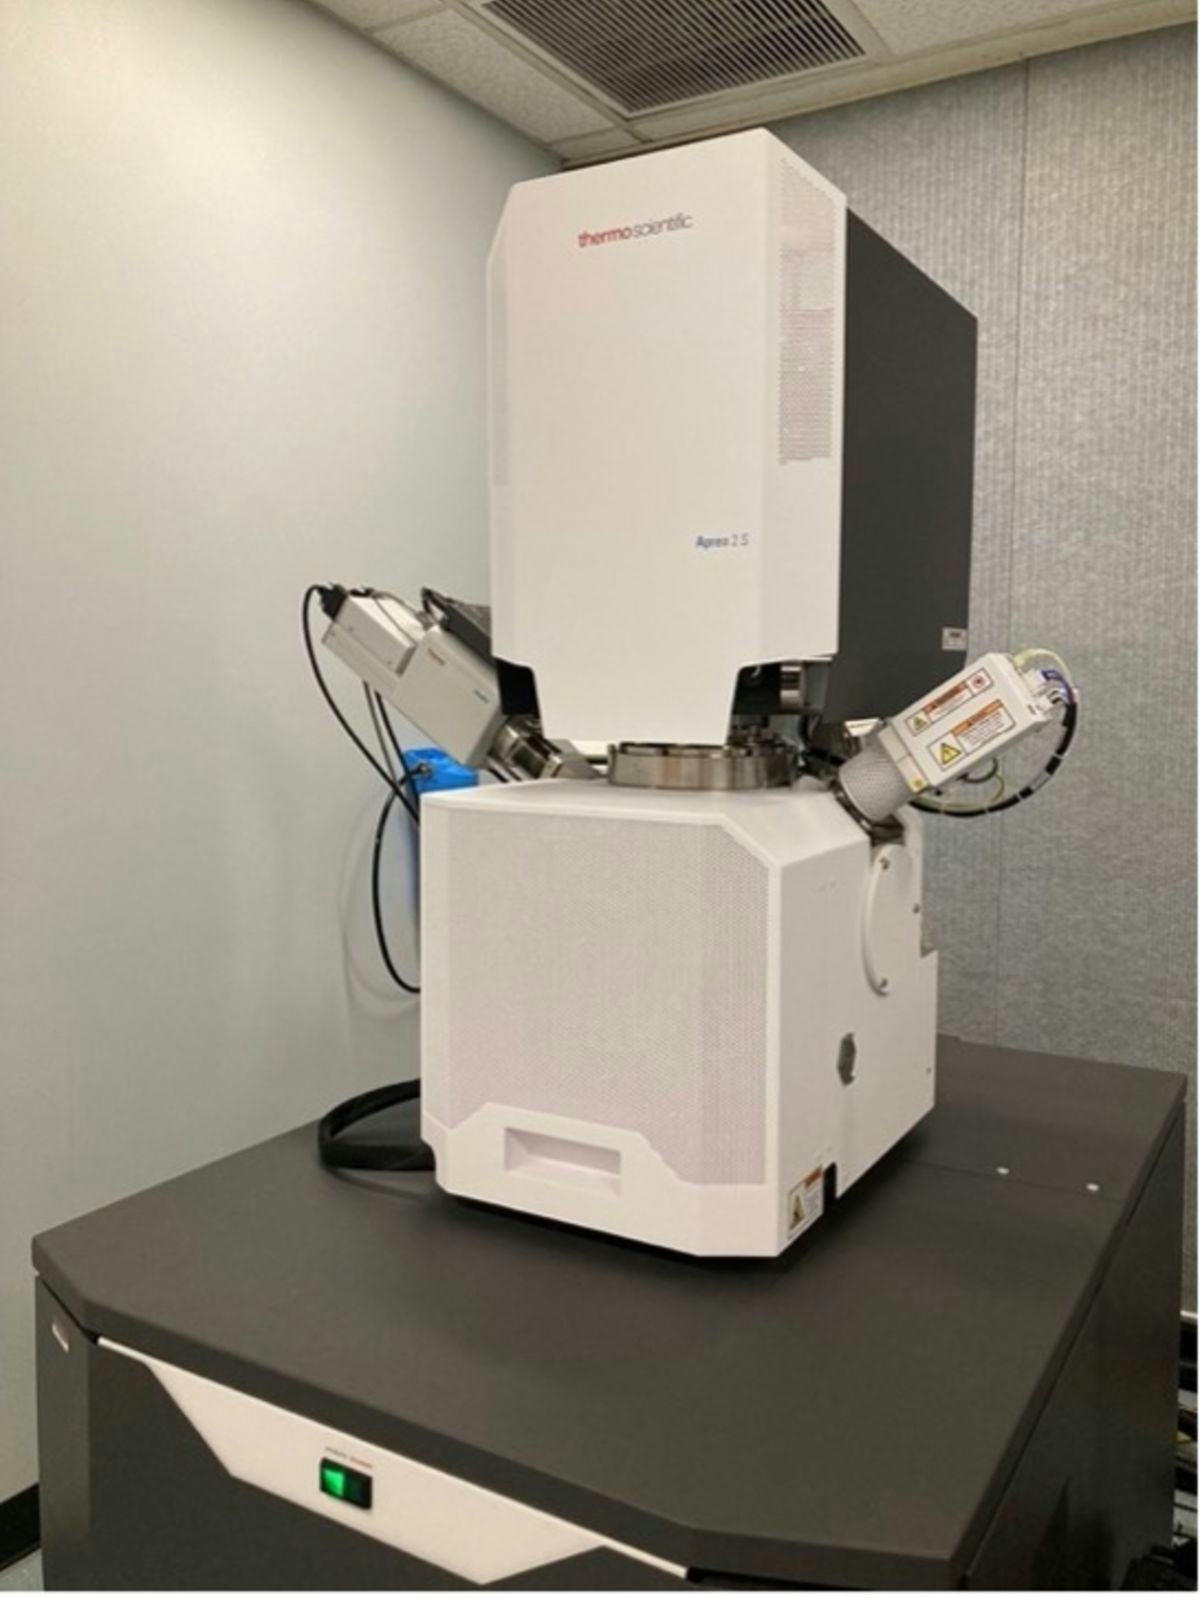 ThermoFisher Apreo 2S Scanning Electron Microscope